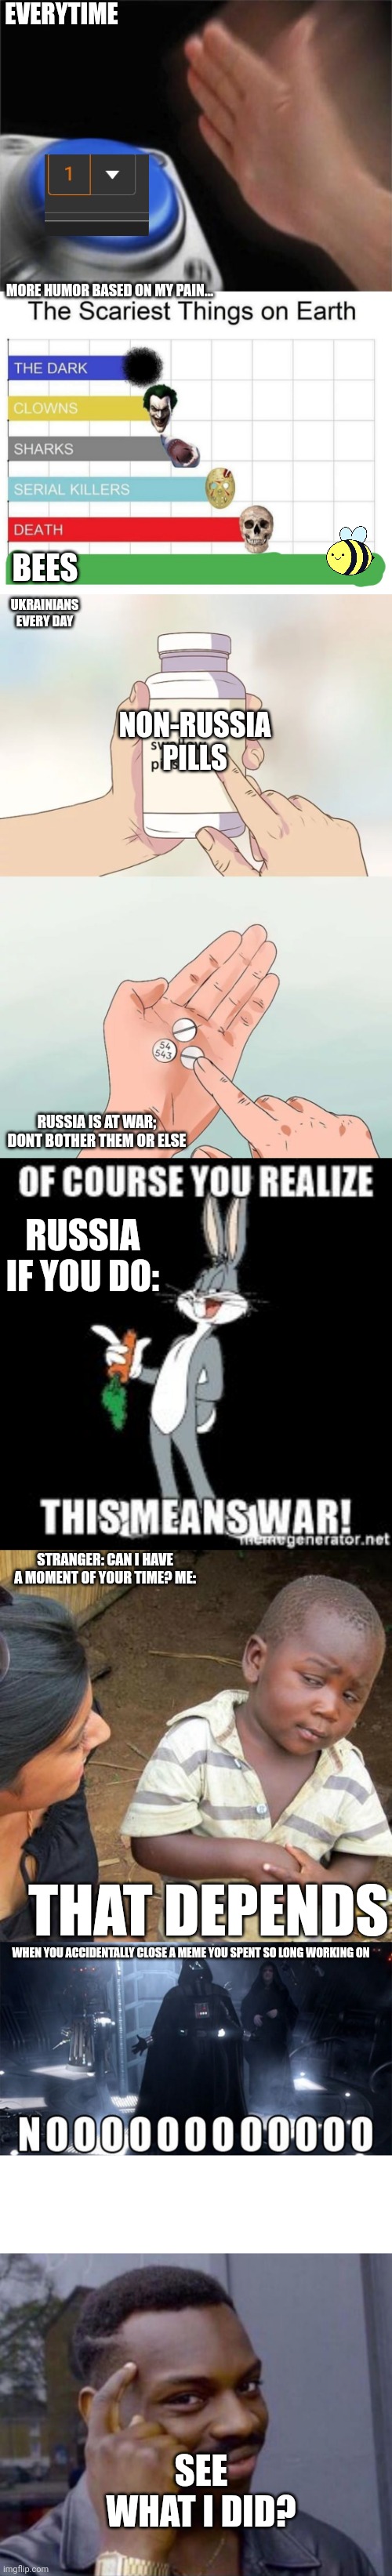 I present to you... THE MULTI-MEME! | EVERYTIME; MORE HUMOR BASED ON MY PAIN... BEES; UKRAINIANS EVERY DAY; NON-RUSSIA PILLS; RUSSIA IS AT WAR; DONT BOTHER THEM OR ELSE; RUSSIA IF YOU DO:; STRANGER: CAN I HAVE A MOMENT OF YOUR TIME? ME:; THAT DEPENDS; WHEN YOU ACCIDENTALLY CLOSE A MEME YOU SPENT SO LONG WORKING ON; SEE WHAT I DID? | image tagged in blank nut button,scariest things on earth,hard to swallow pills,third world skeptical kid,fun,multimeme | made w/ Imgflip meme maker